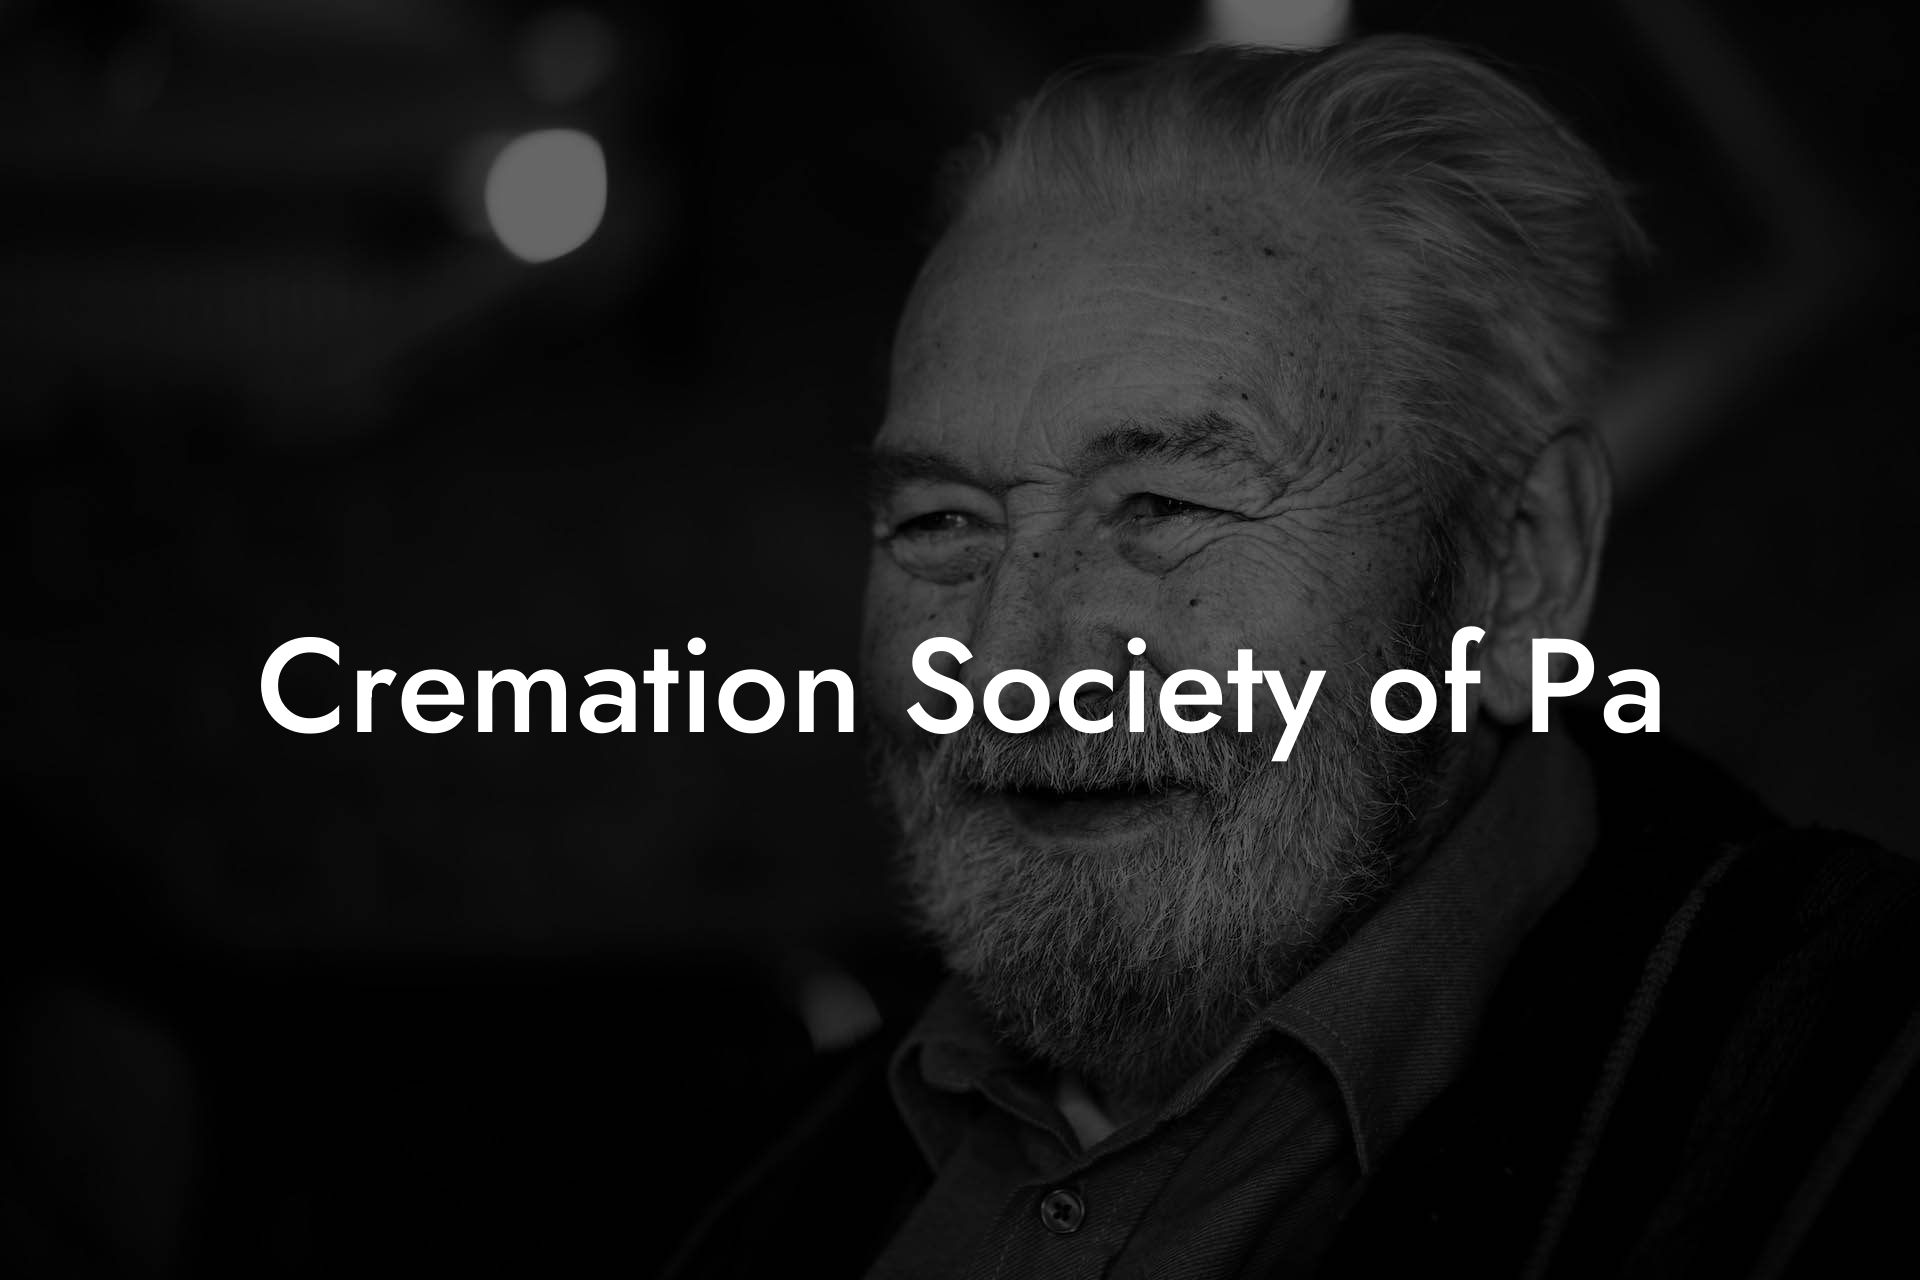 Cremation Society of Pa